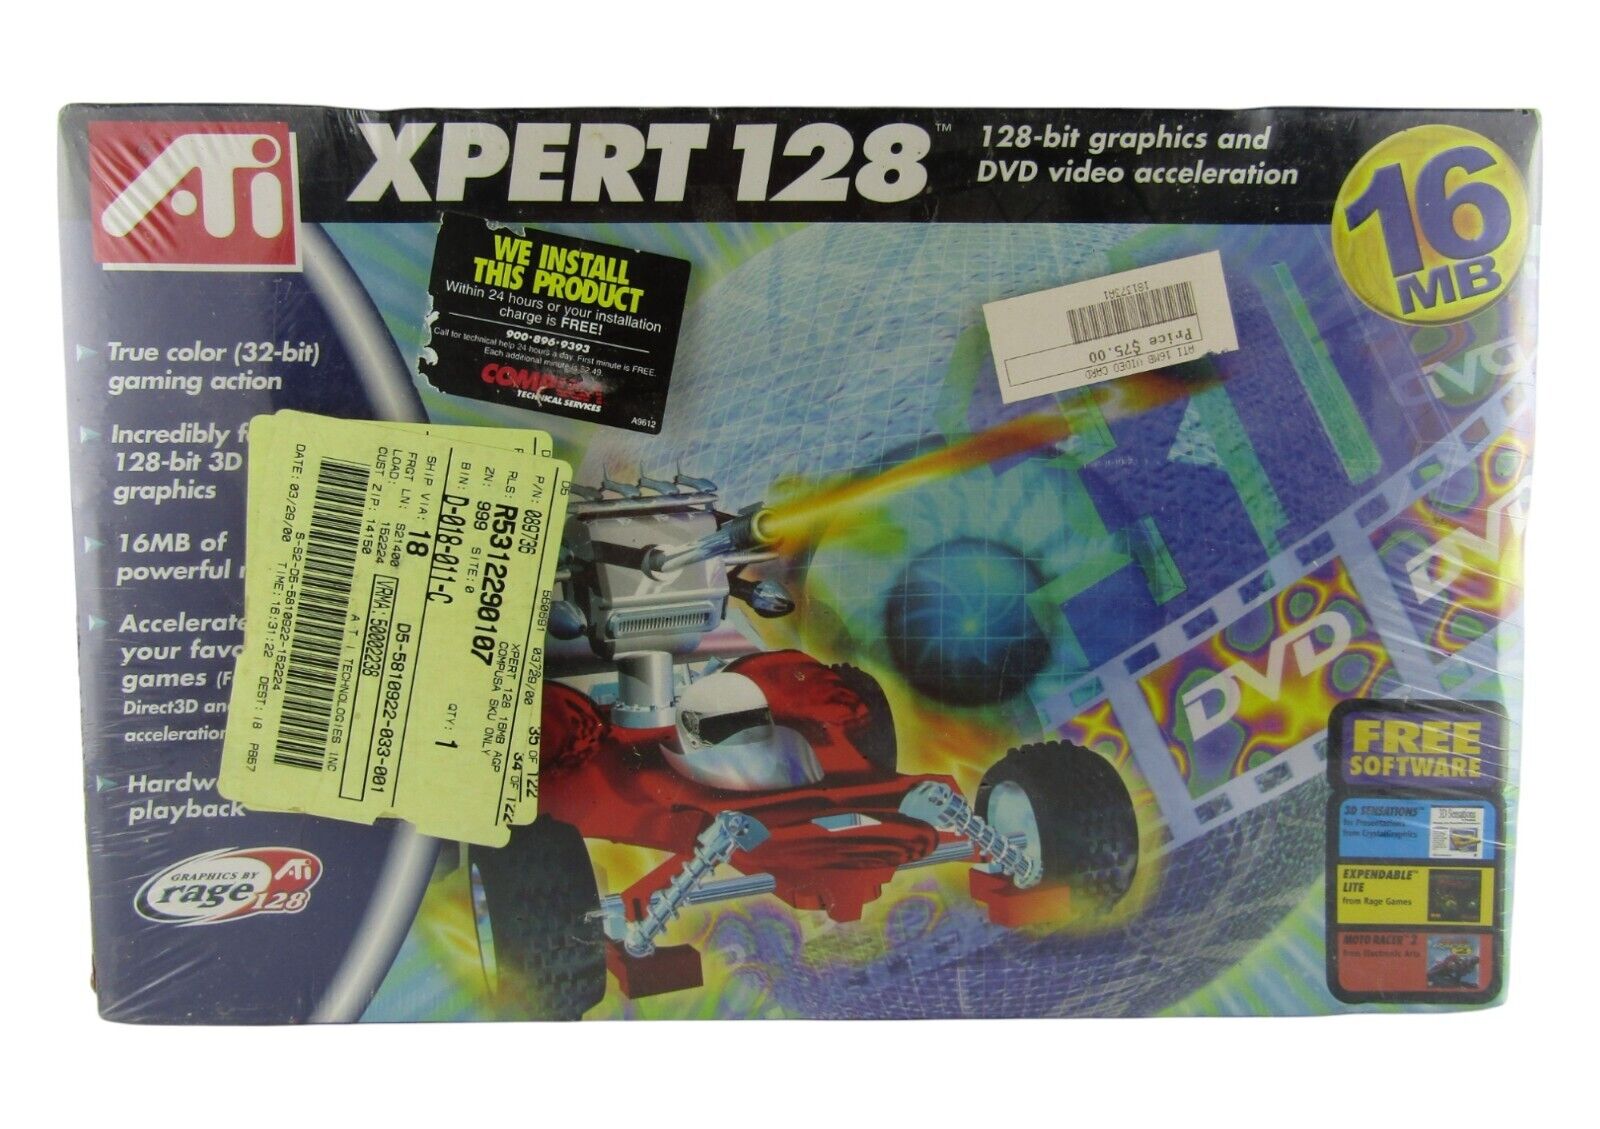 ATI XPERT 128 Bit Graphics And DVD Video Acceleration 16 MB, NEW SEALED